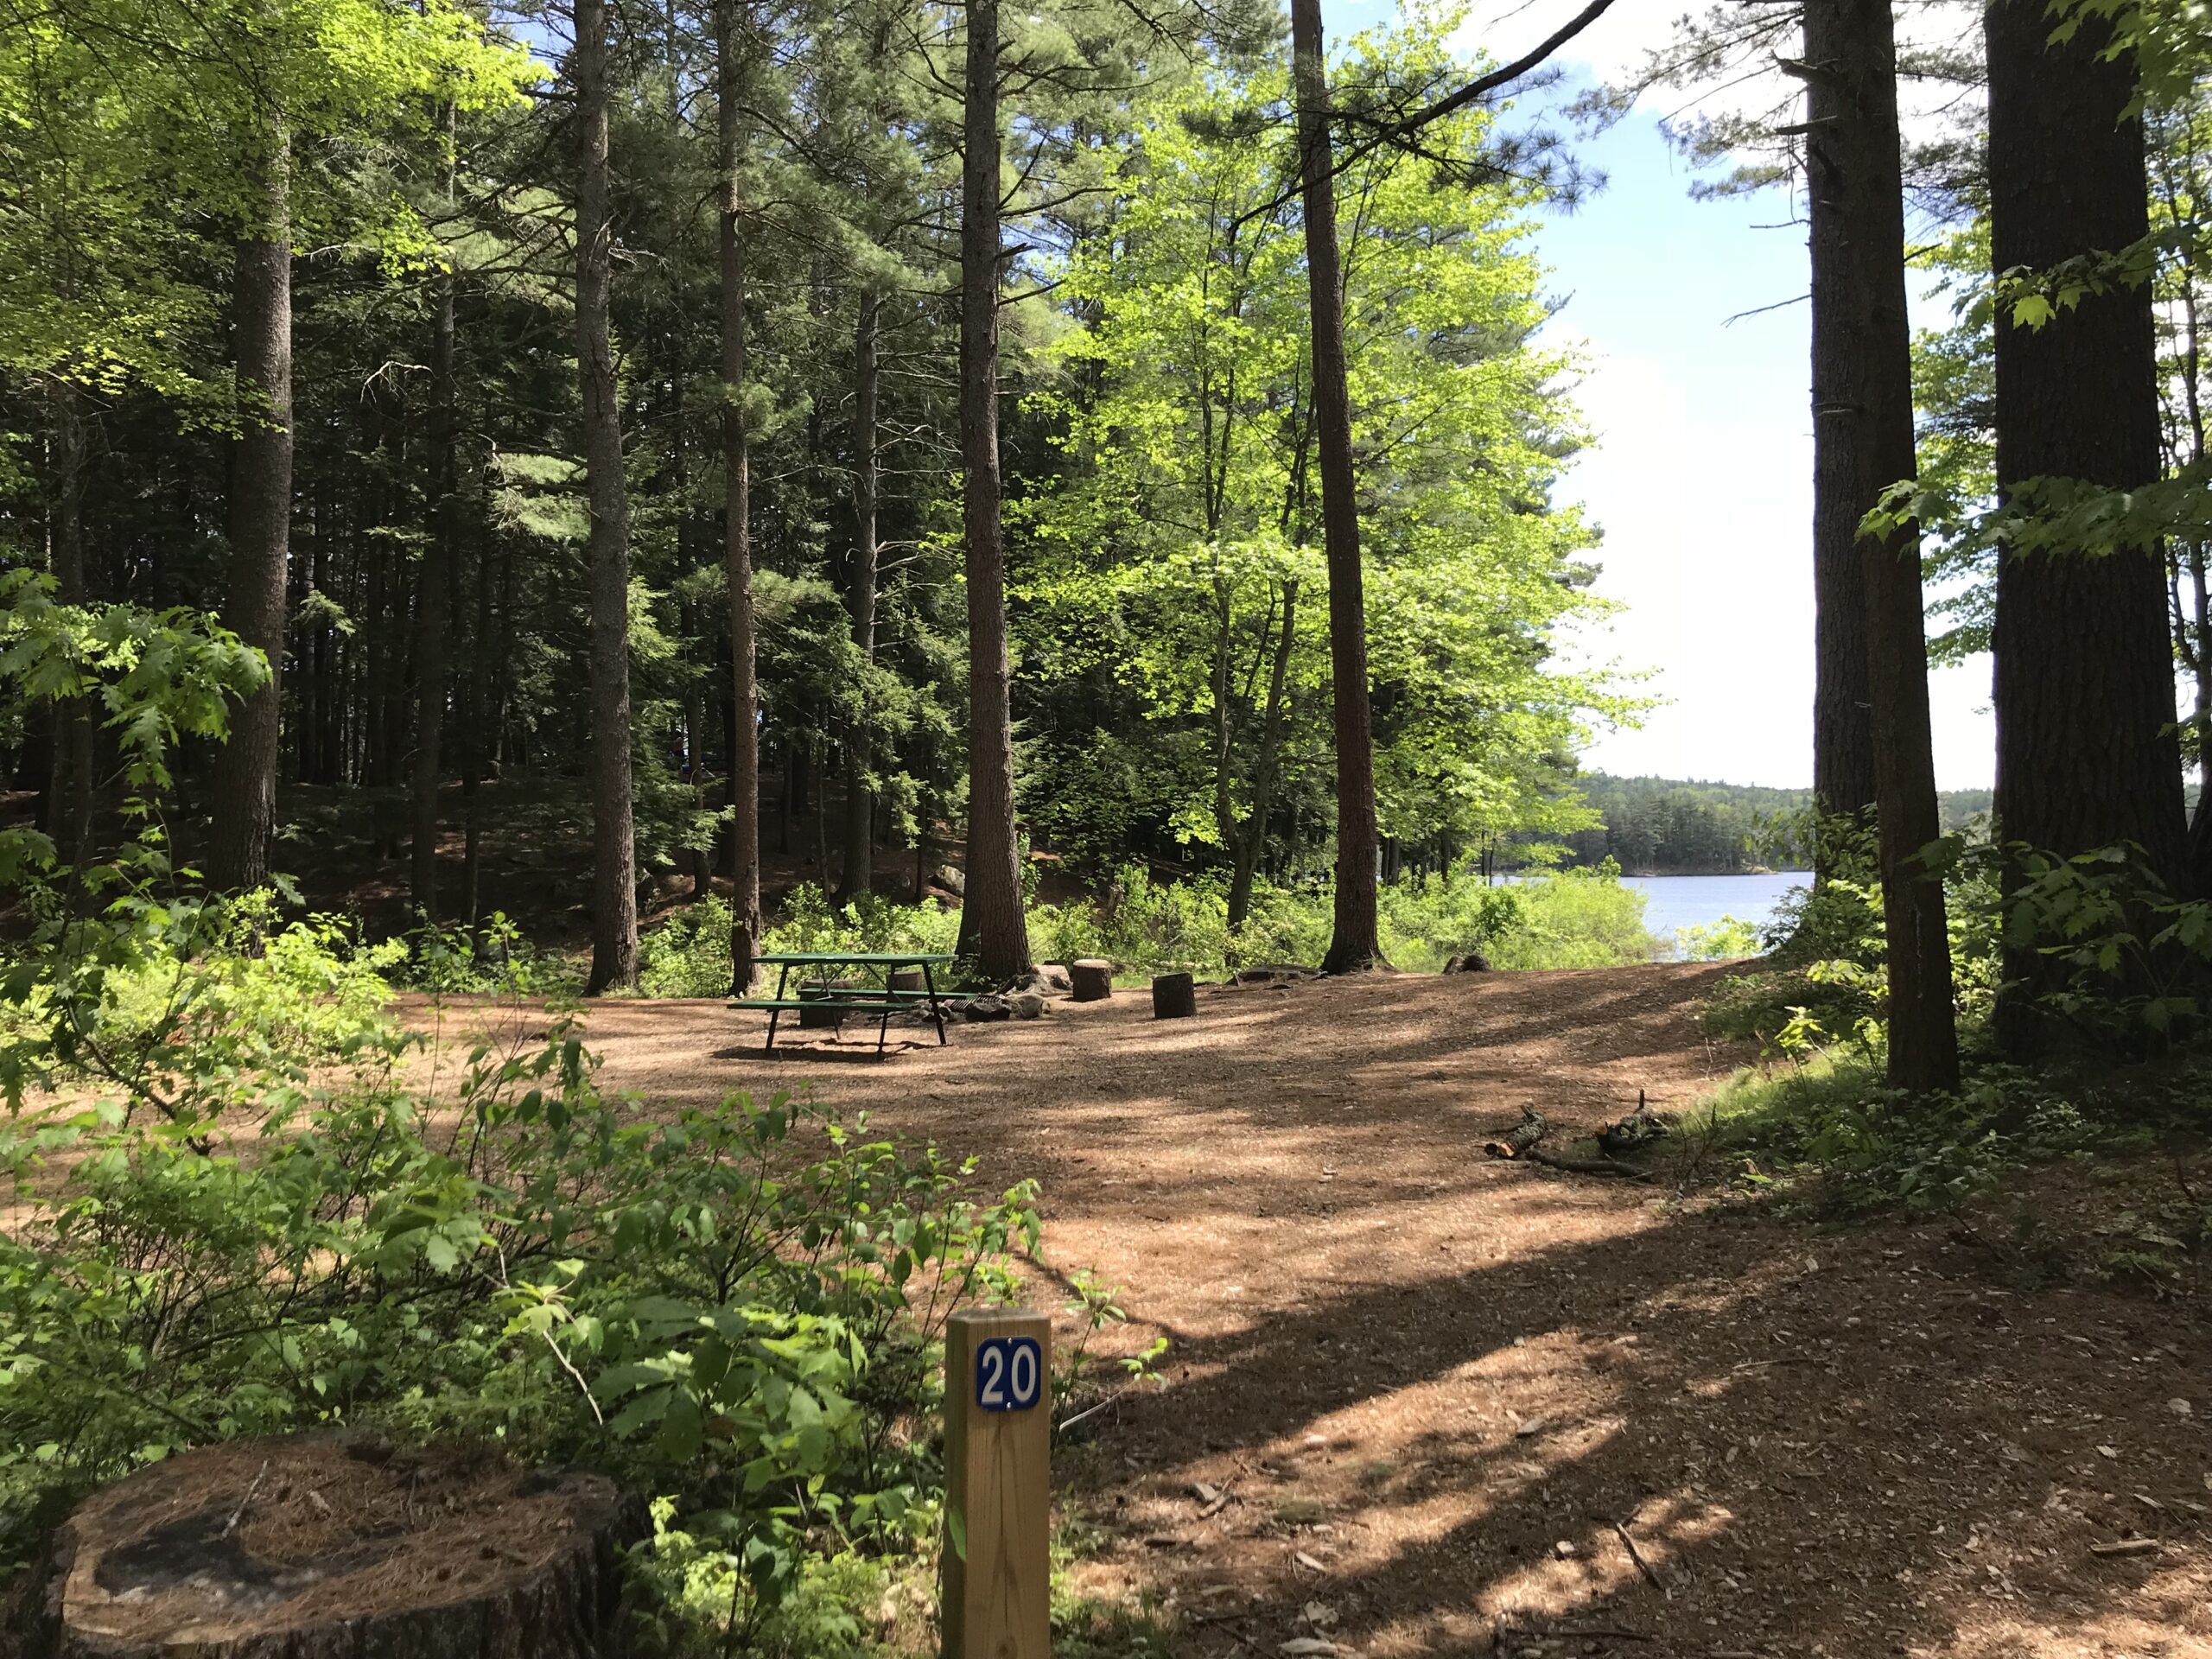 A trail weaves through tall trees with a lake in the background